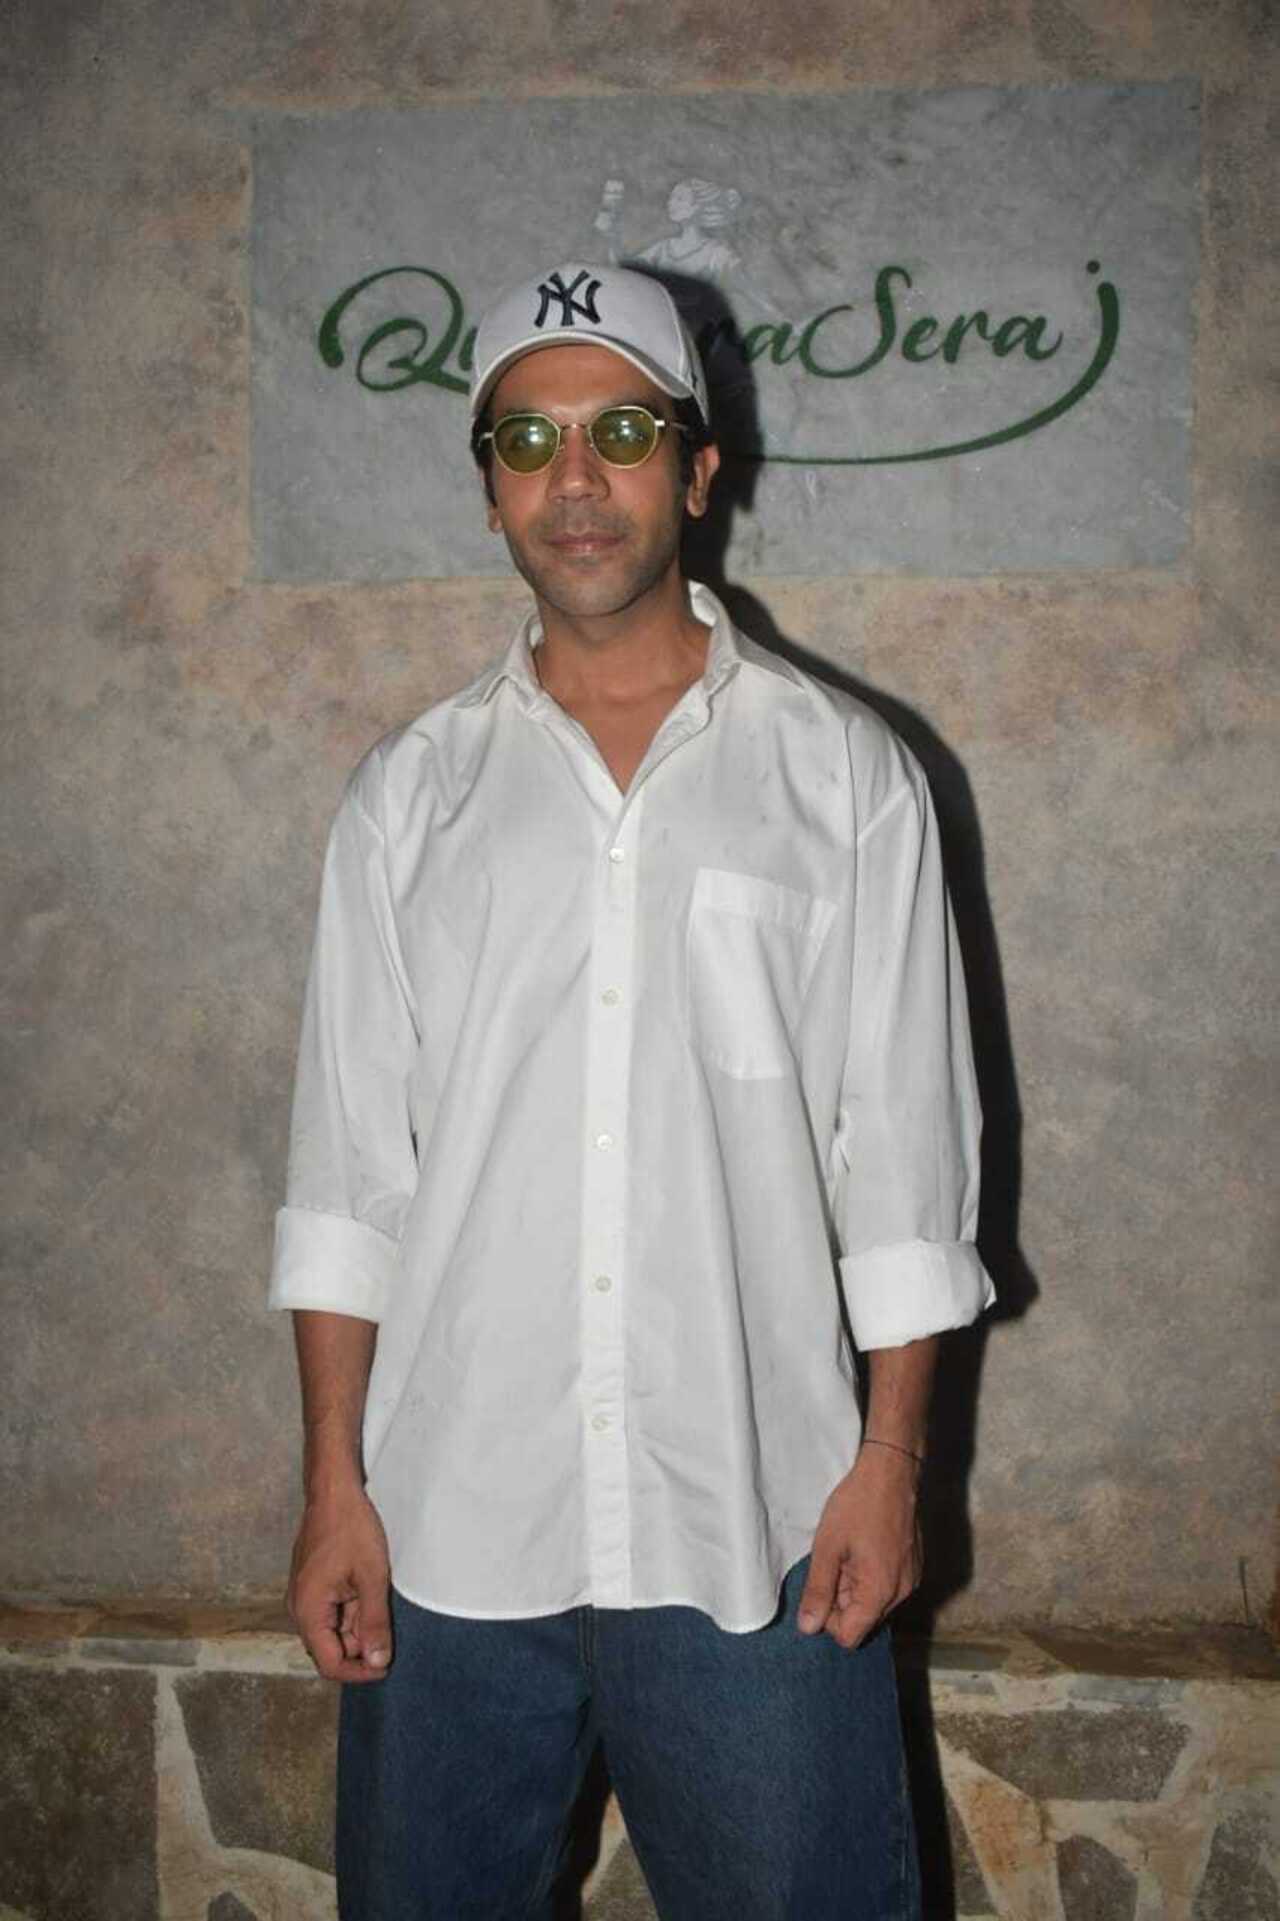 Rajkummar Rao opted for an all-white outfit as he came to attend Huma's birthday bash